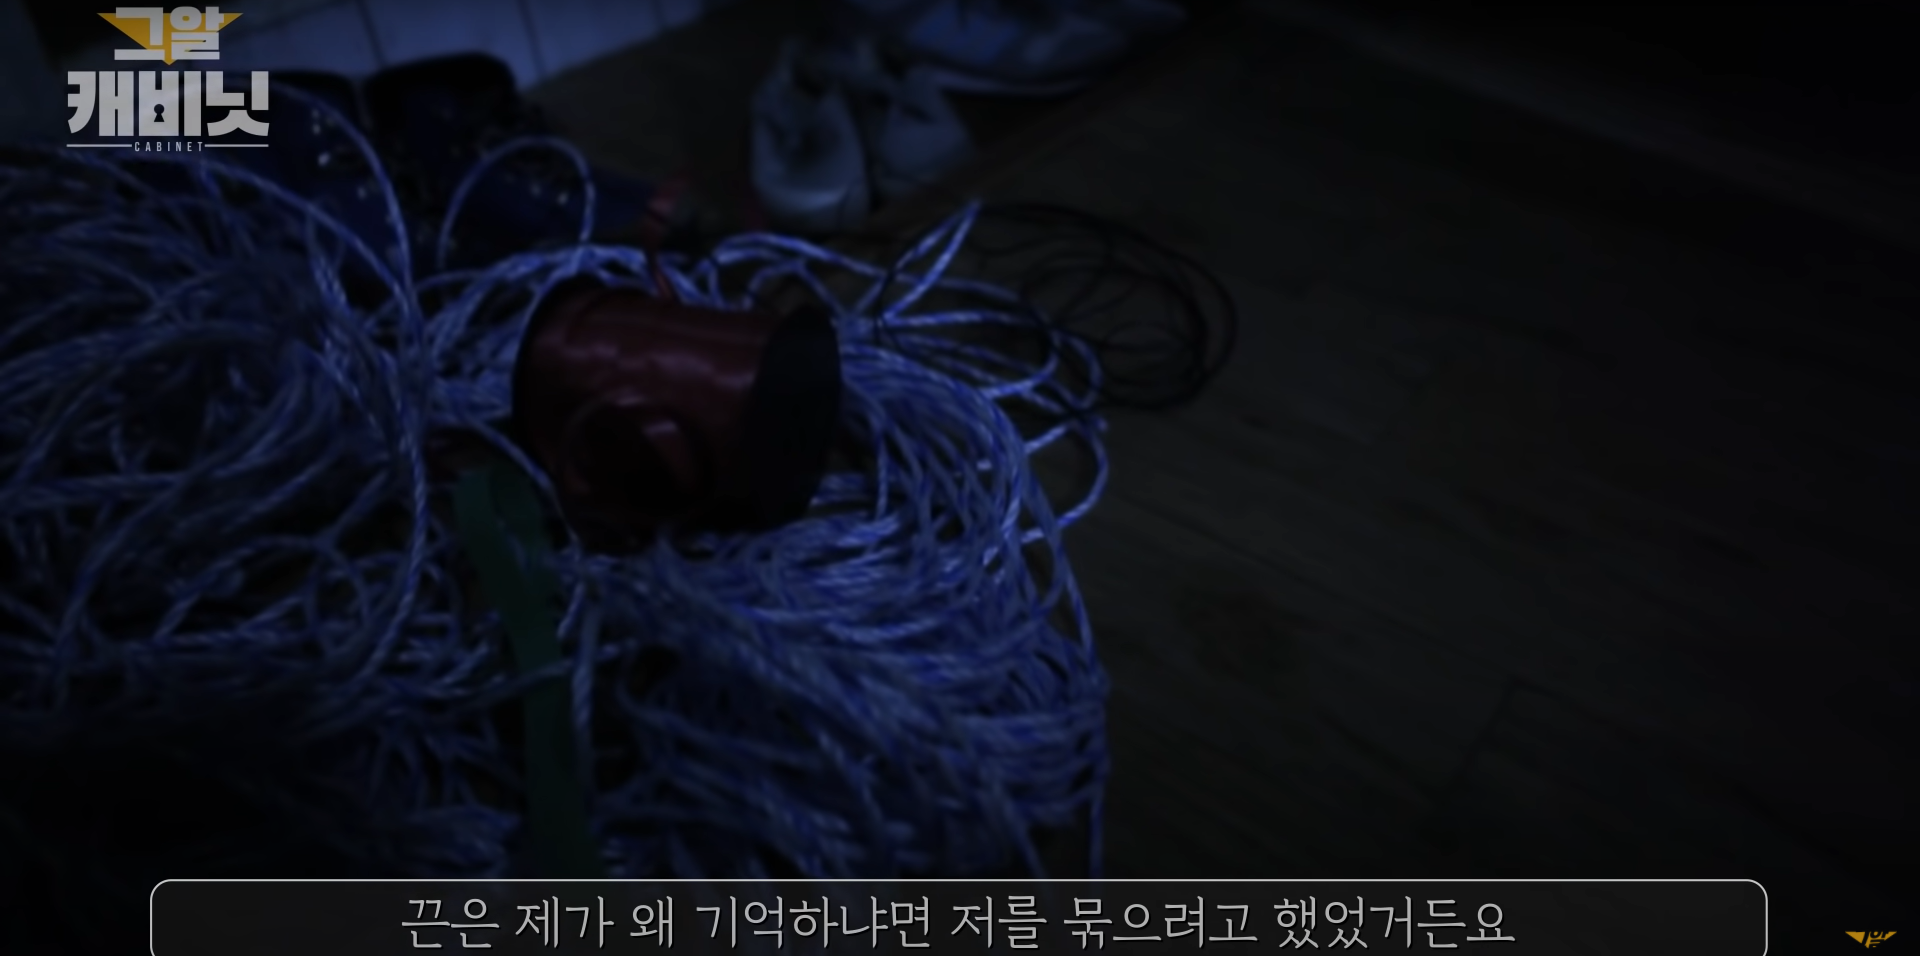 unsolved crimes in korea - string